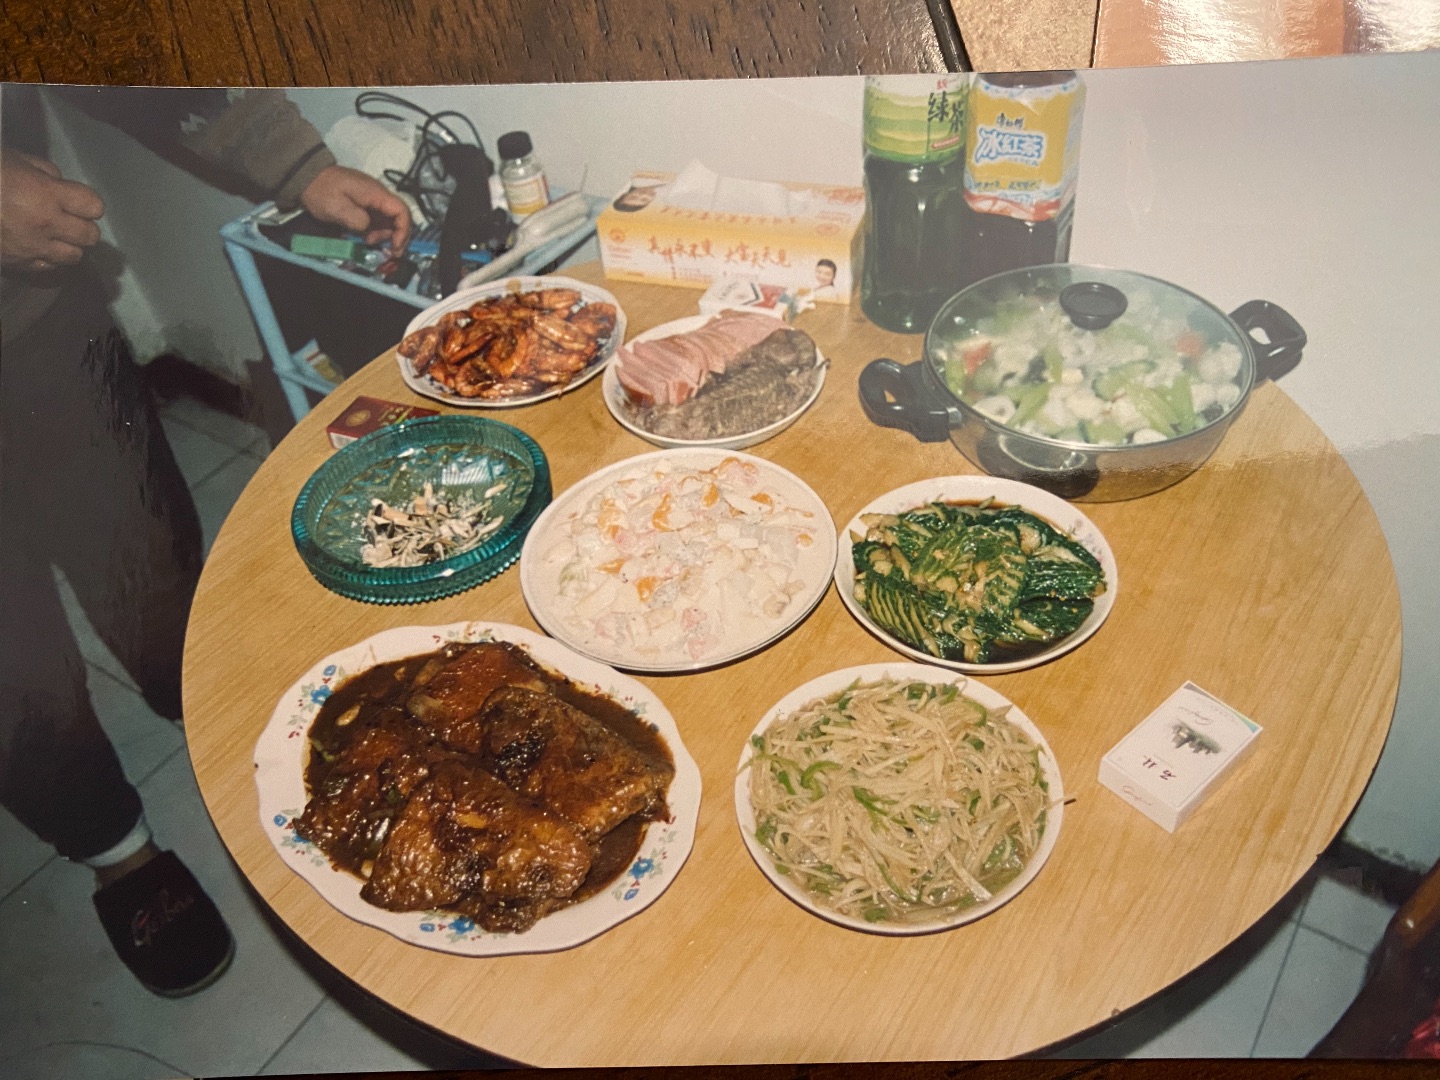 A table spread with many dishes